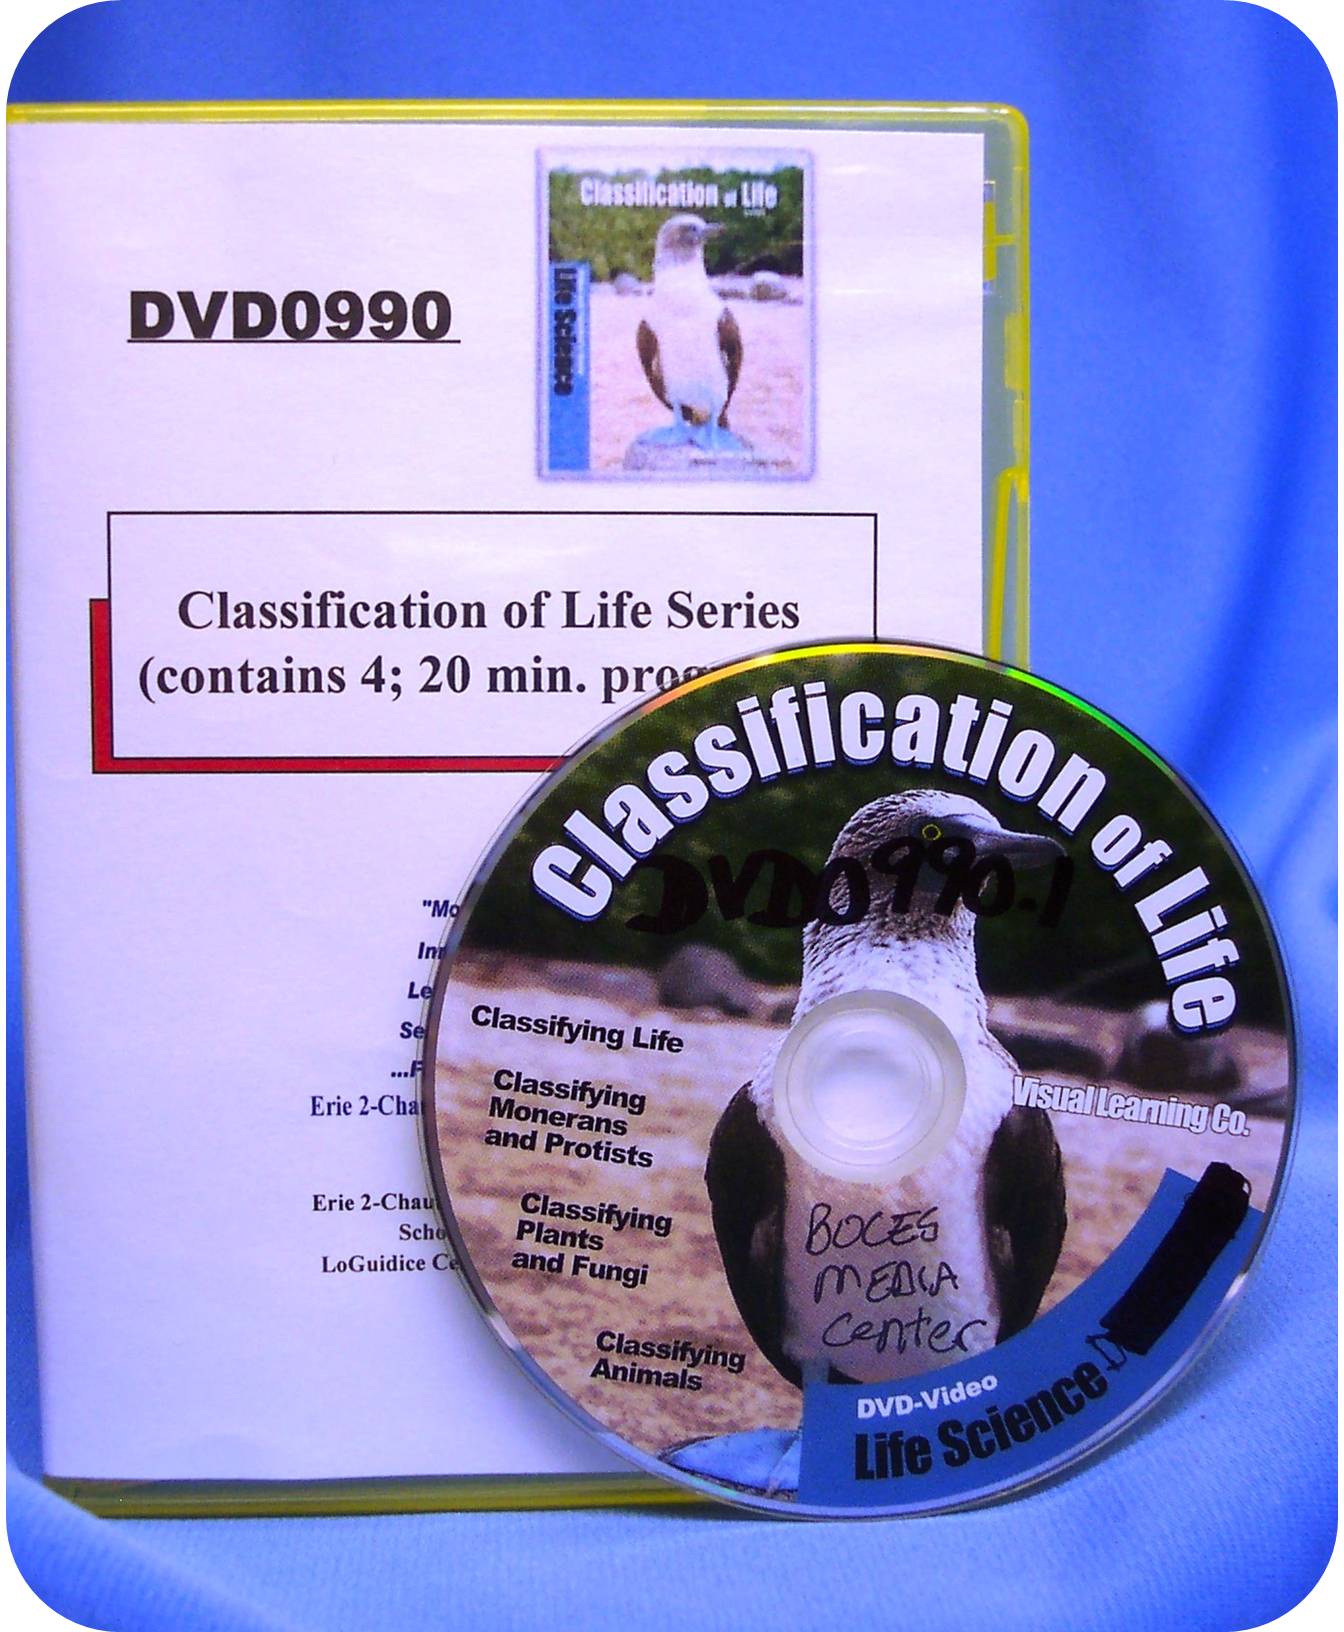 Classification of Life Series (contains 4; 20 min. programs)